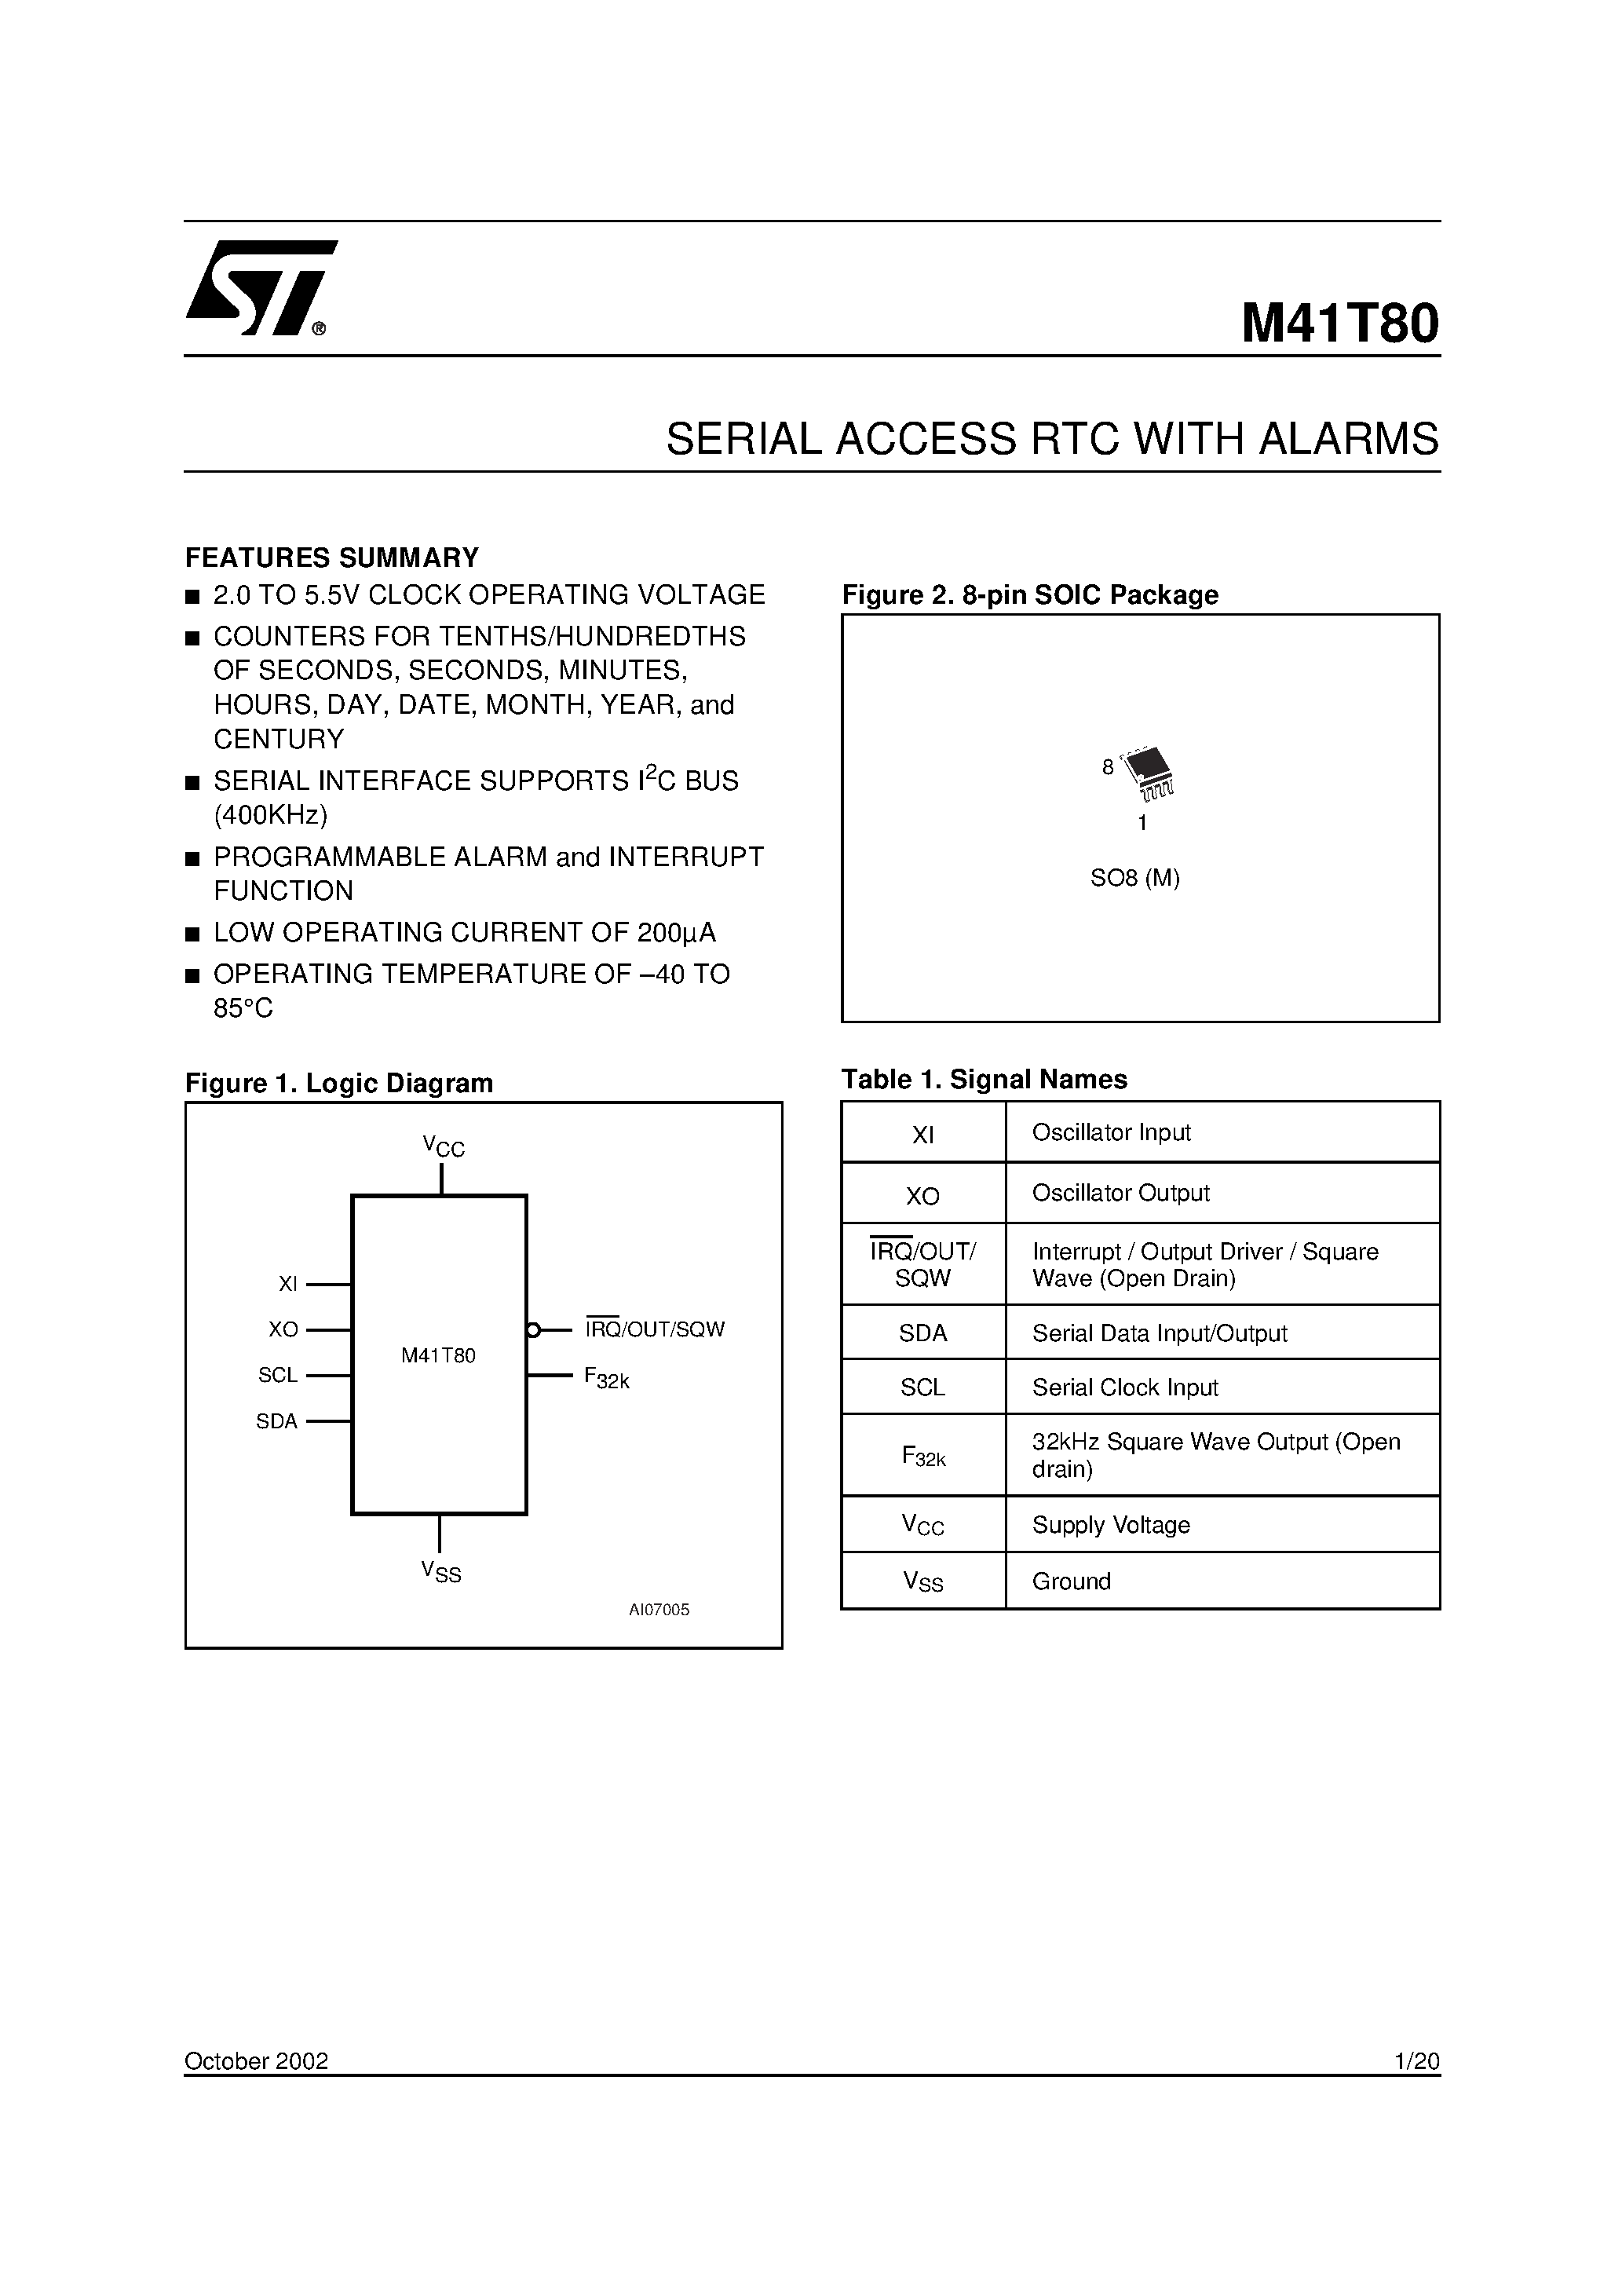 Datasheet M41T80M6 - SERIAL ACCESS RTC WITH ALARMS page 1